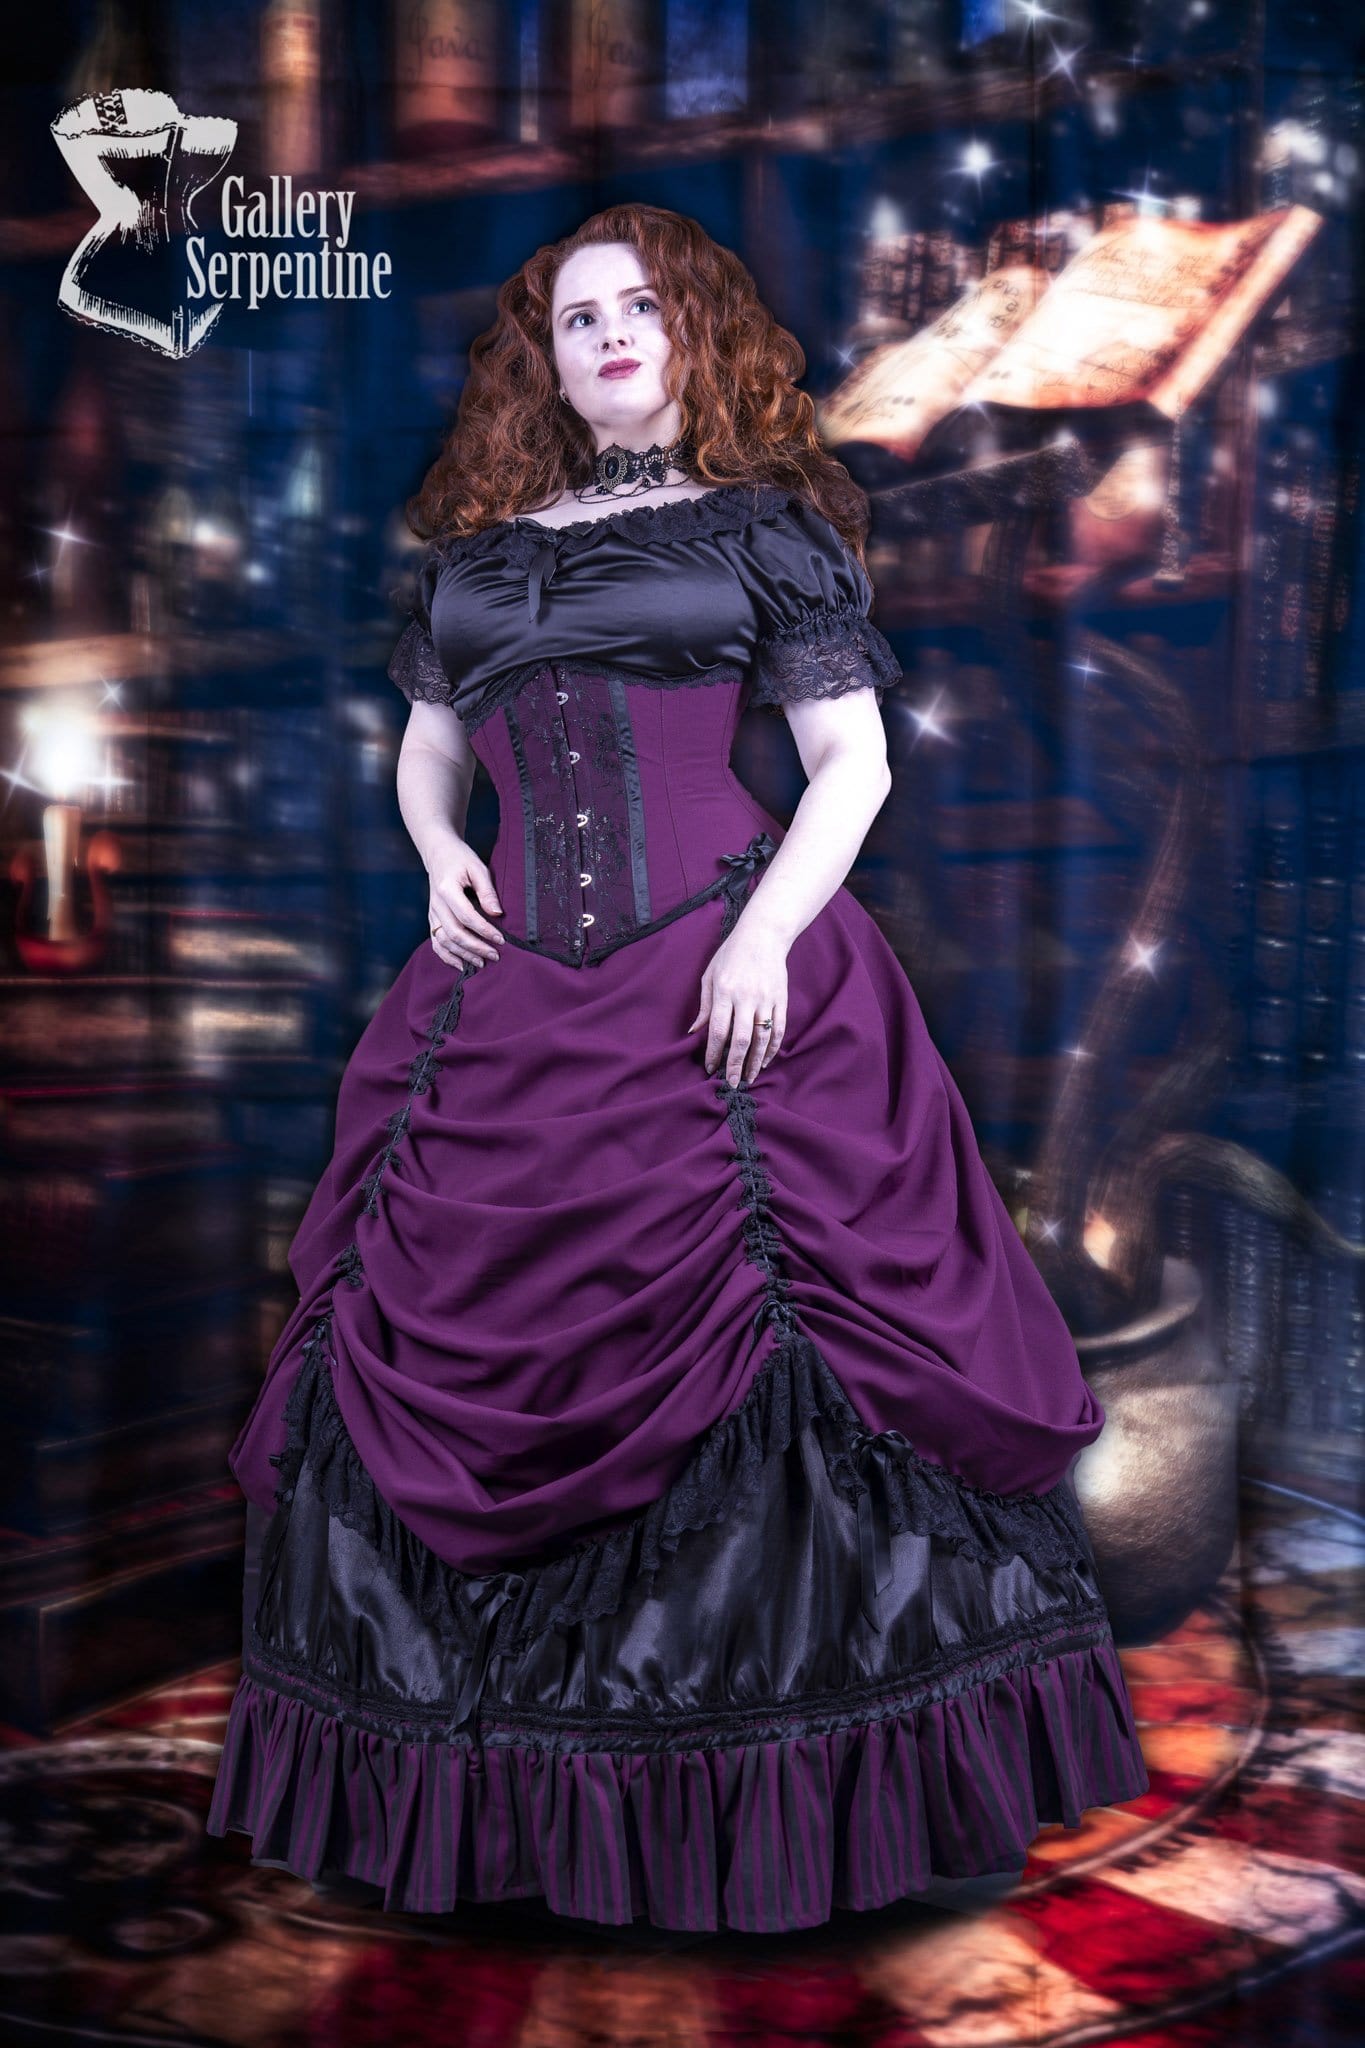 model wearing the full victorian corset gown called Burgundy Beauty including the black satin Alice in Wonderland Chemise